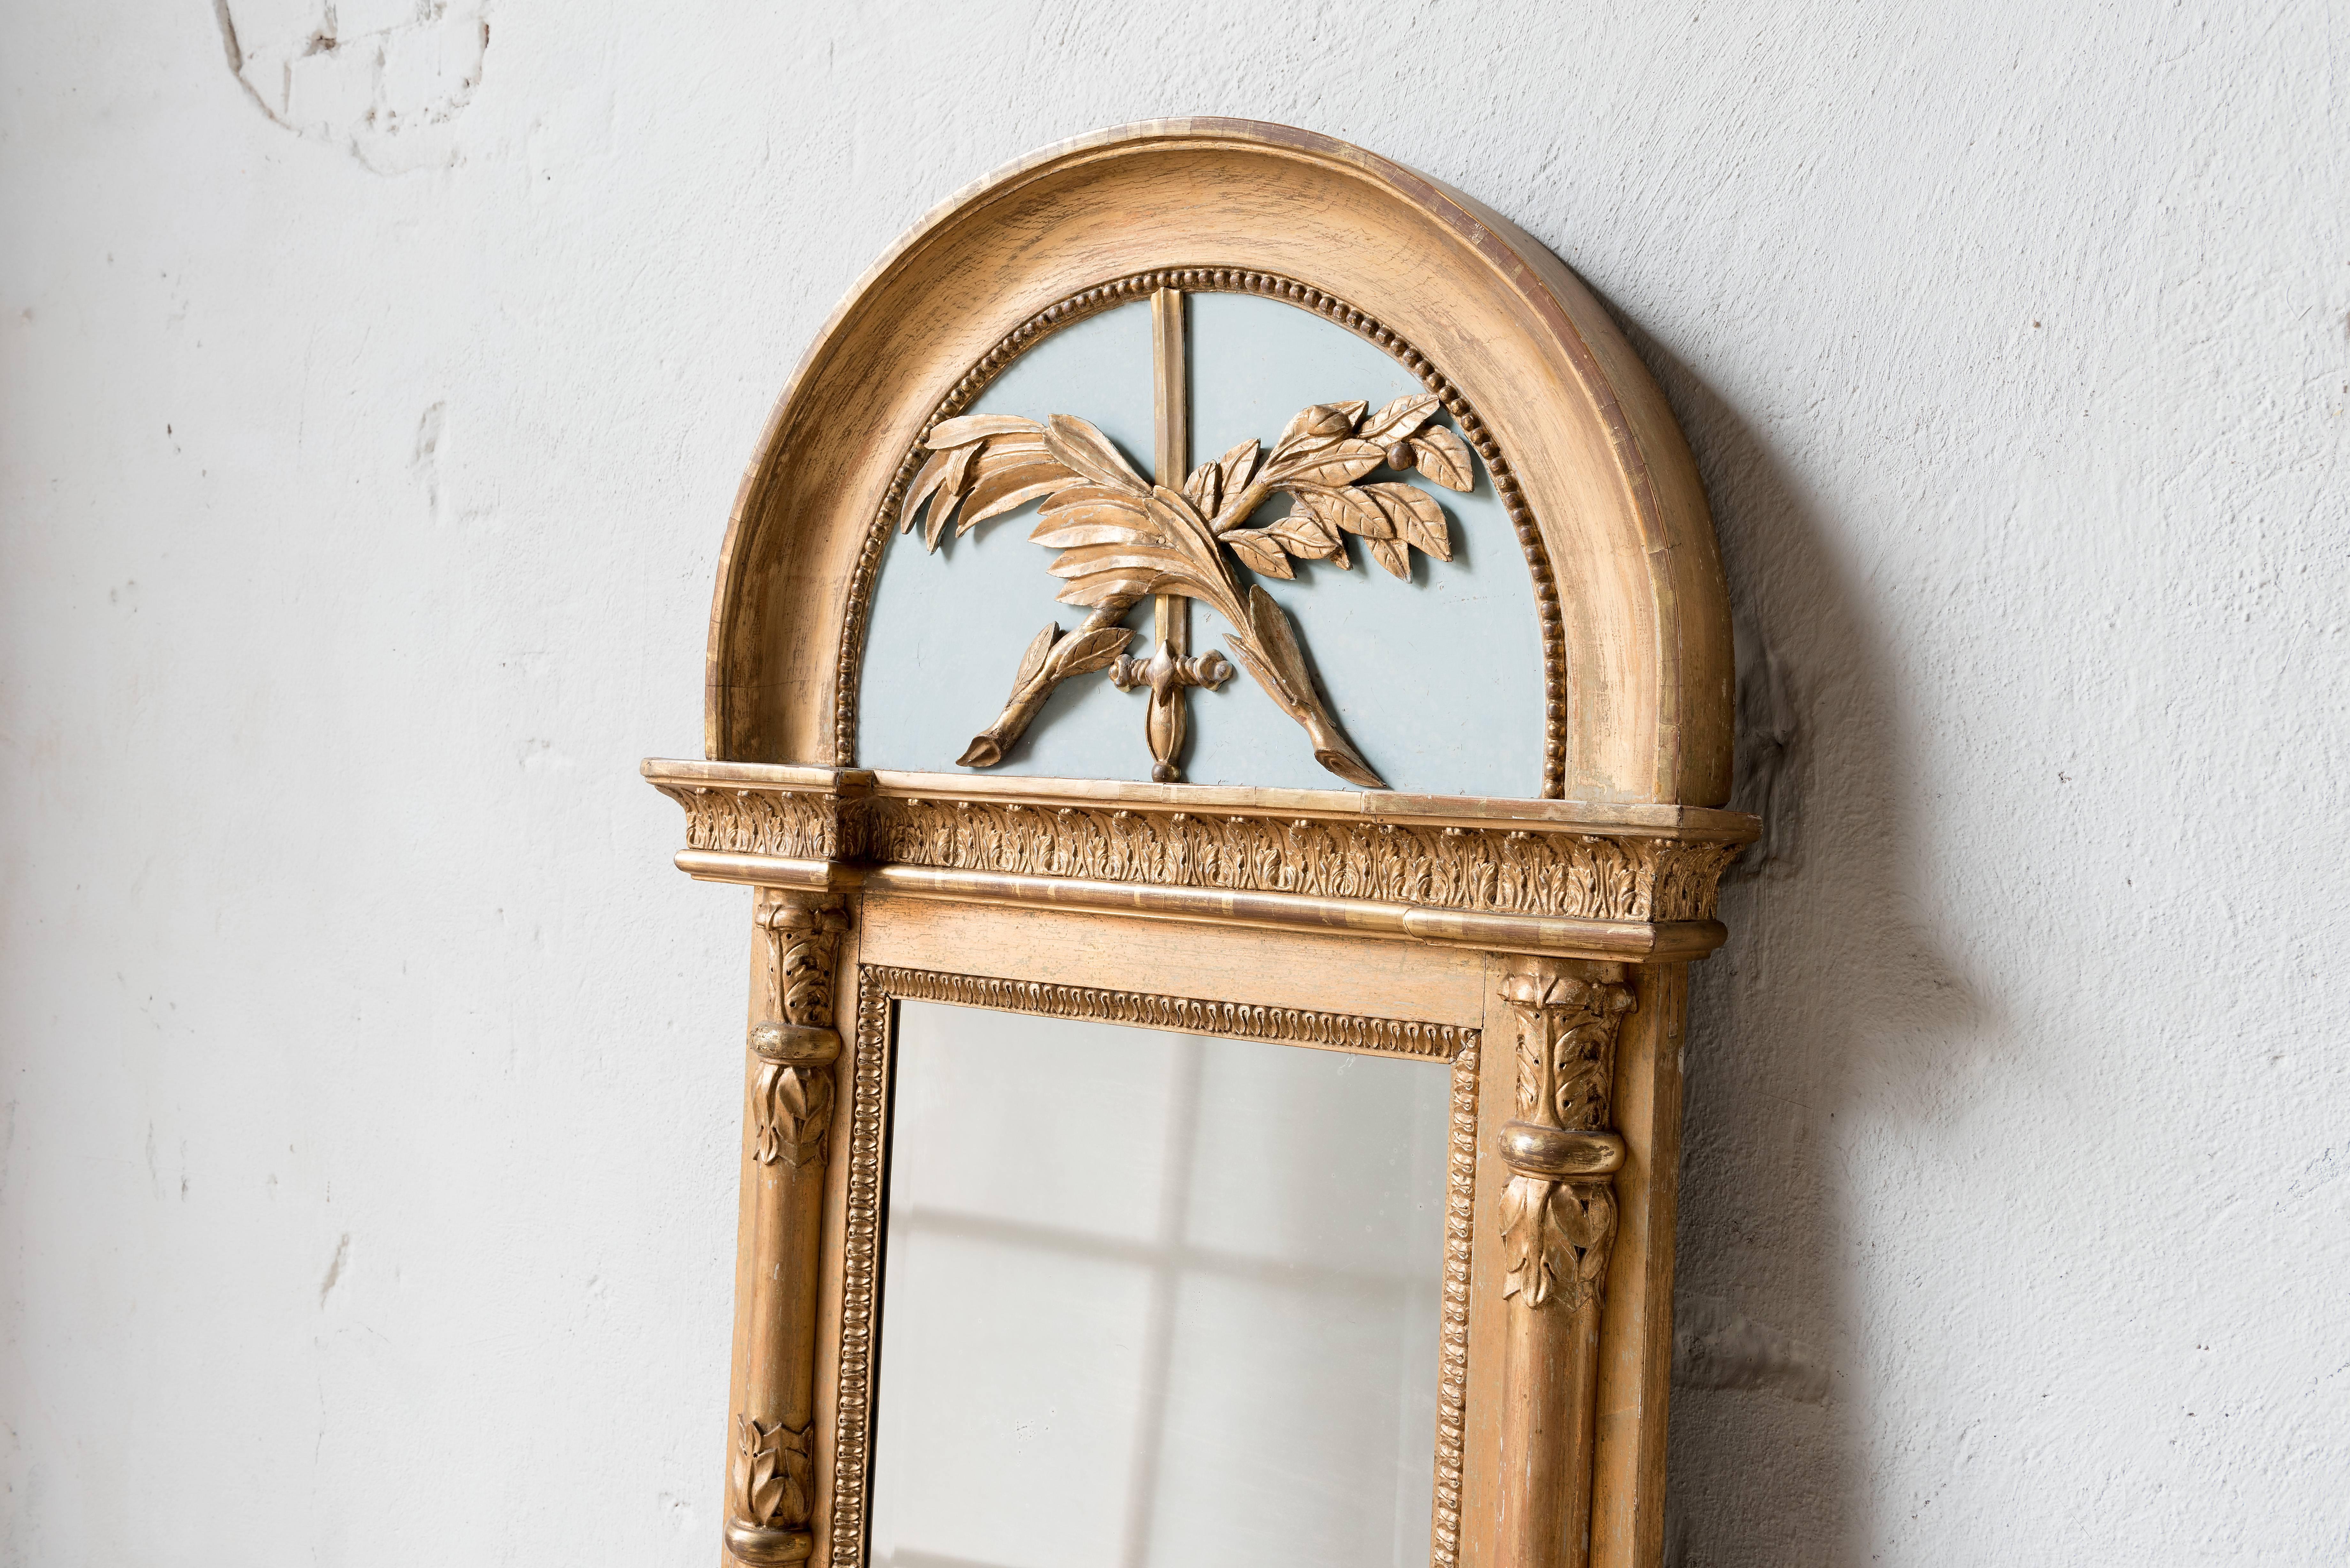 19th Century Swedish Gilded Empire Mirror In Good Condition For Sale In Helsingborg, SE